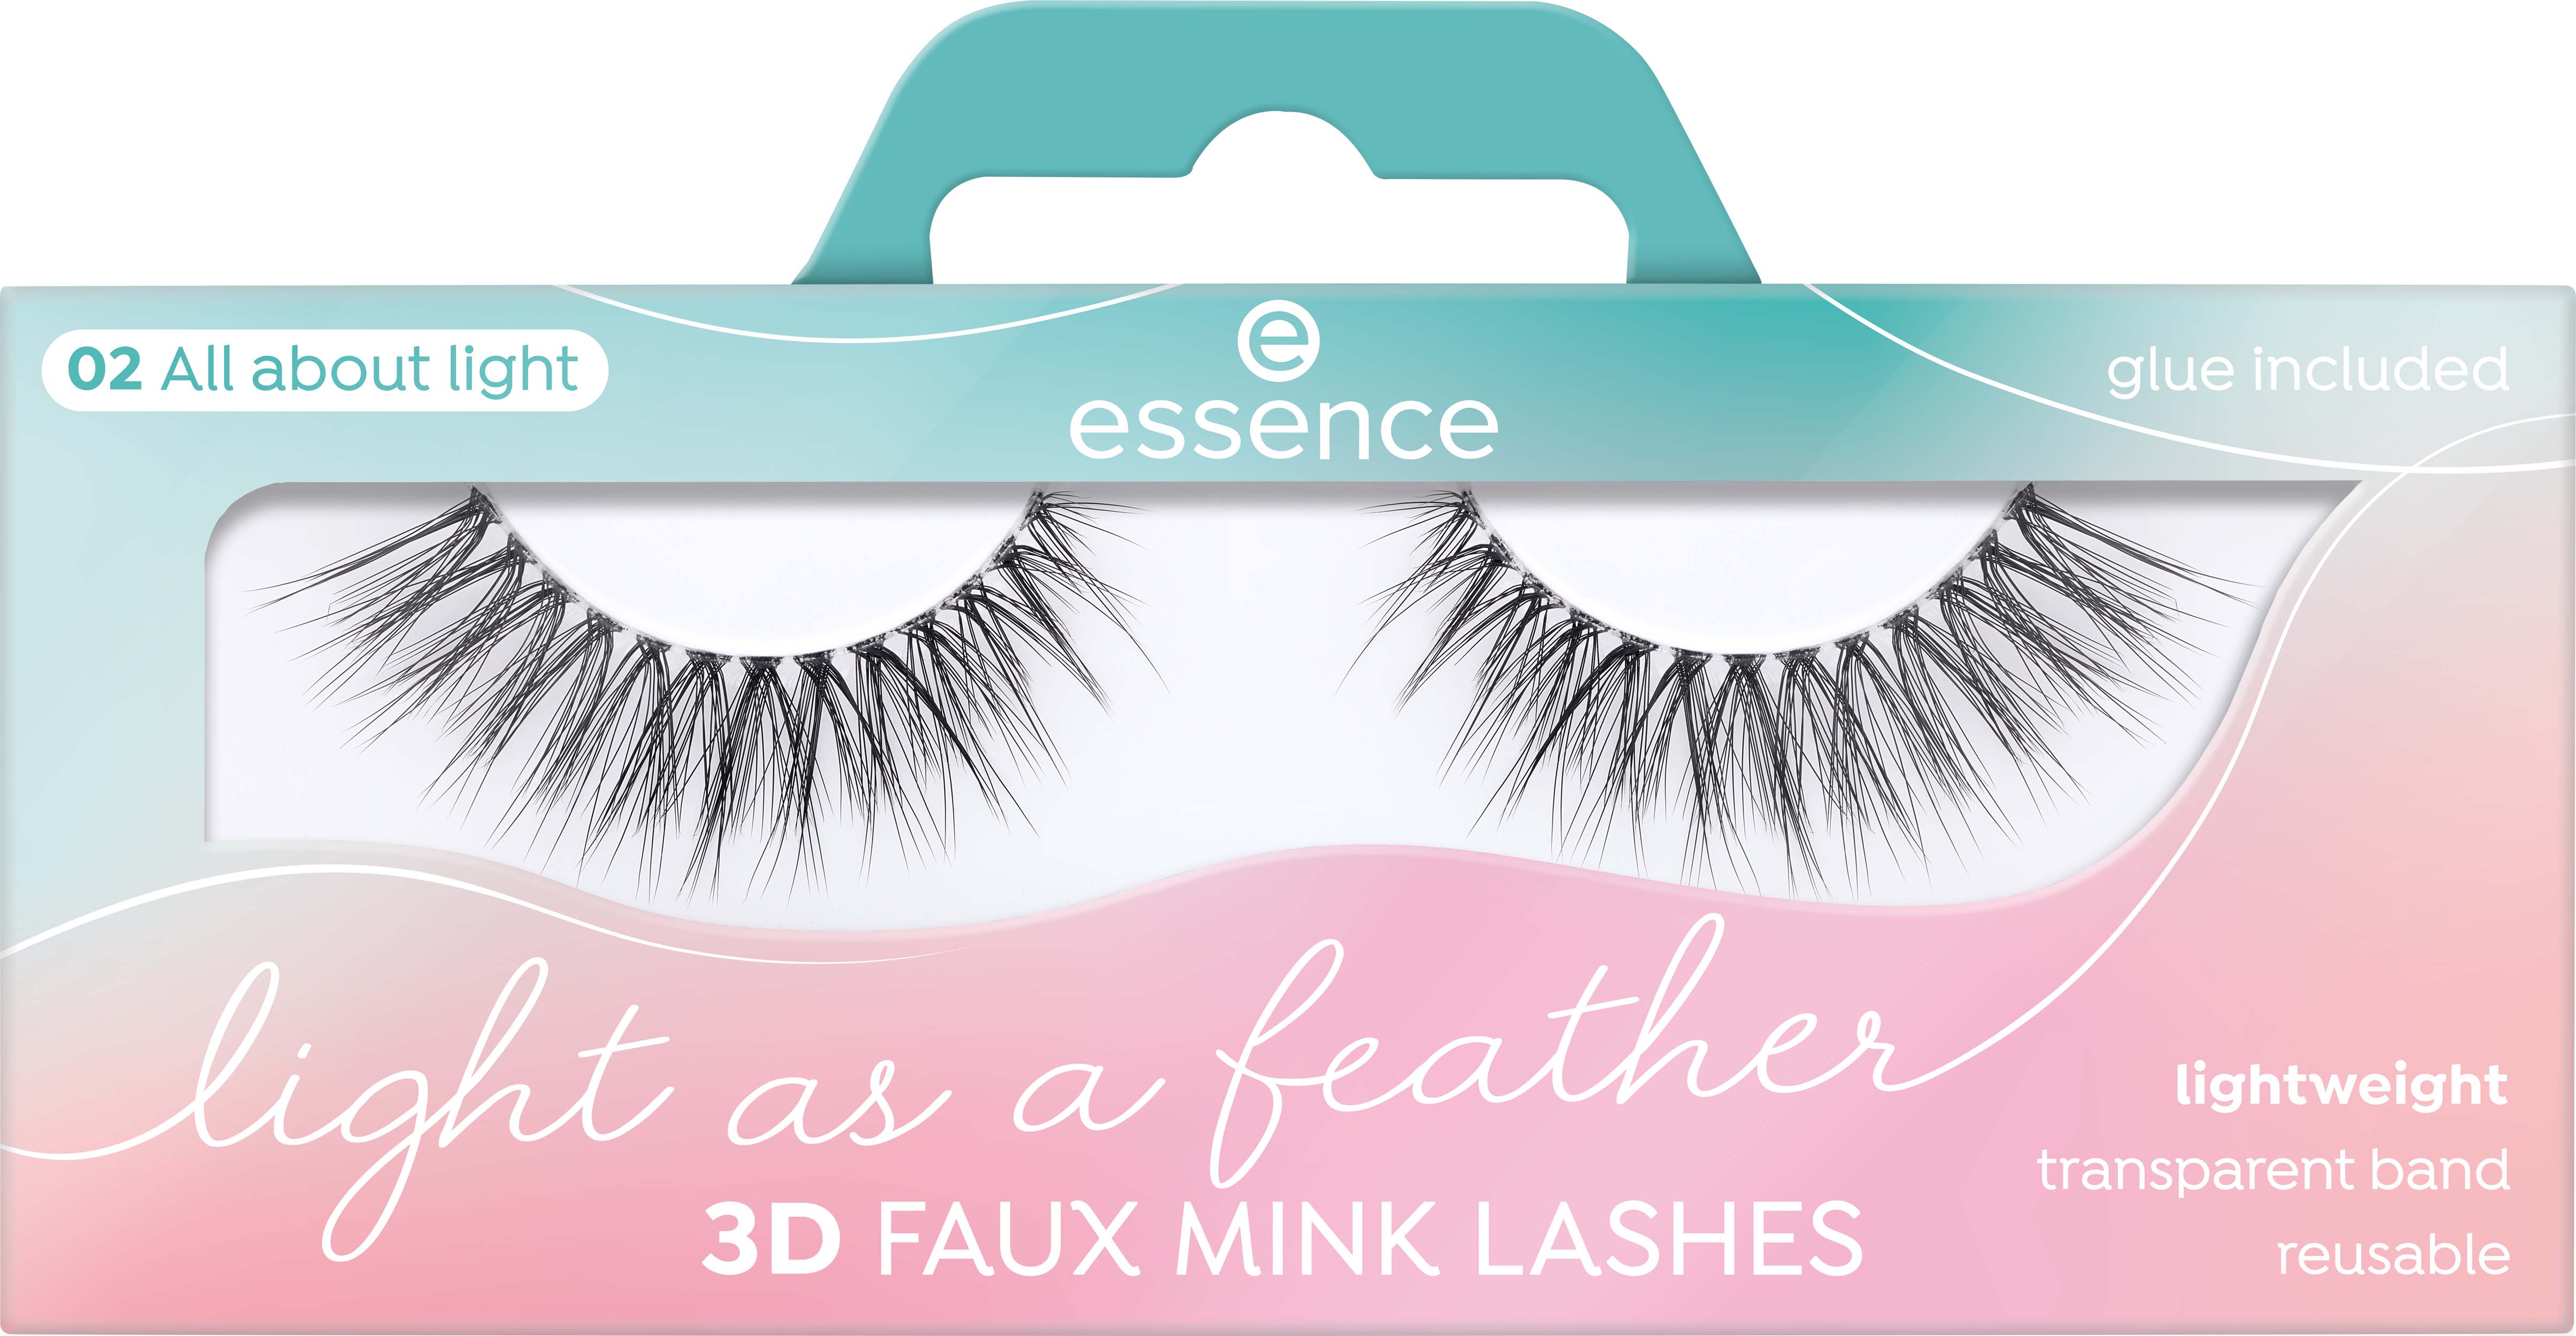 All Feather Mink Lashes 02 3D A about Faux light Light essence As